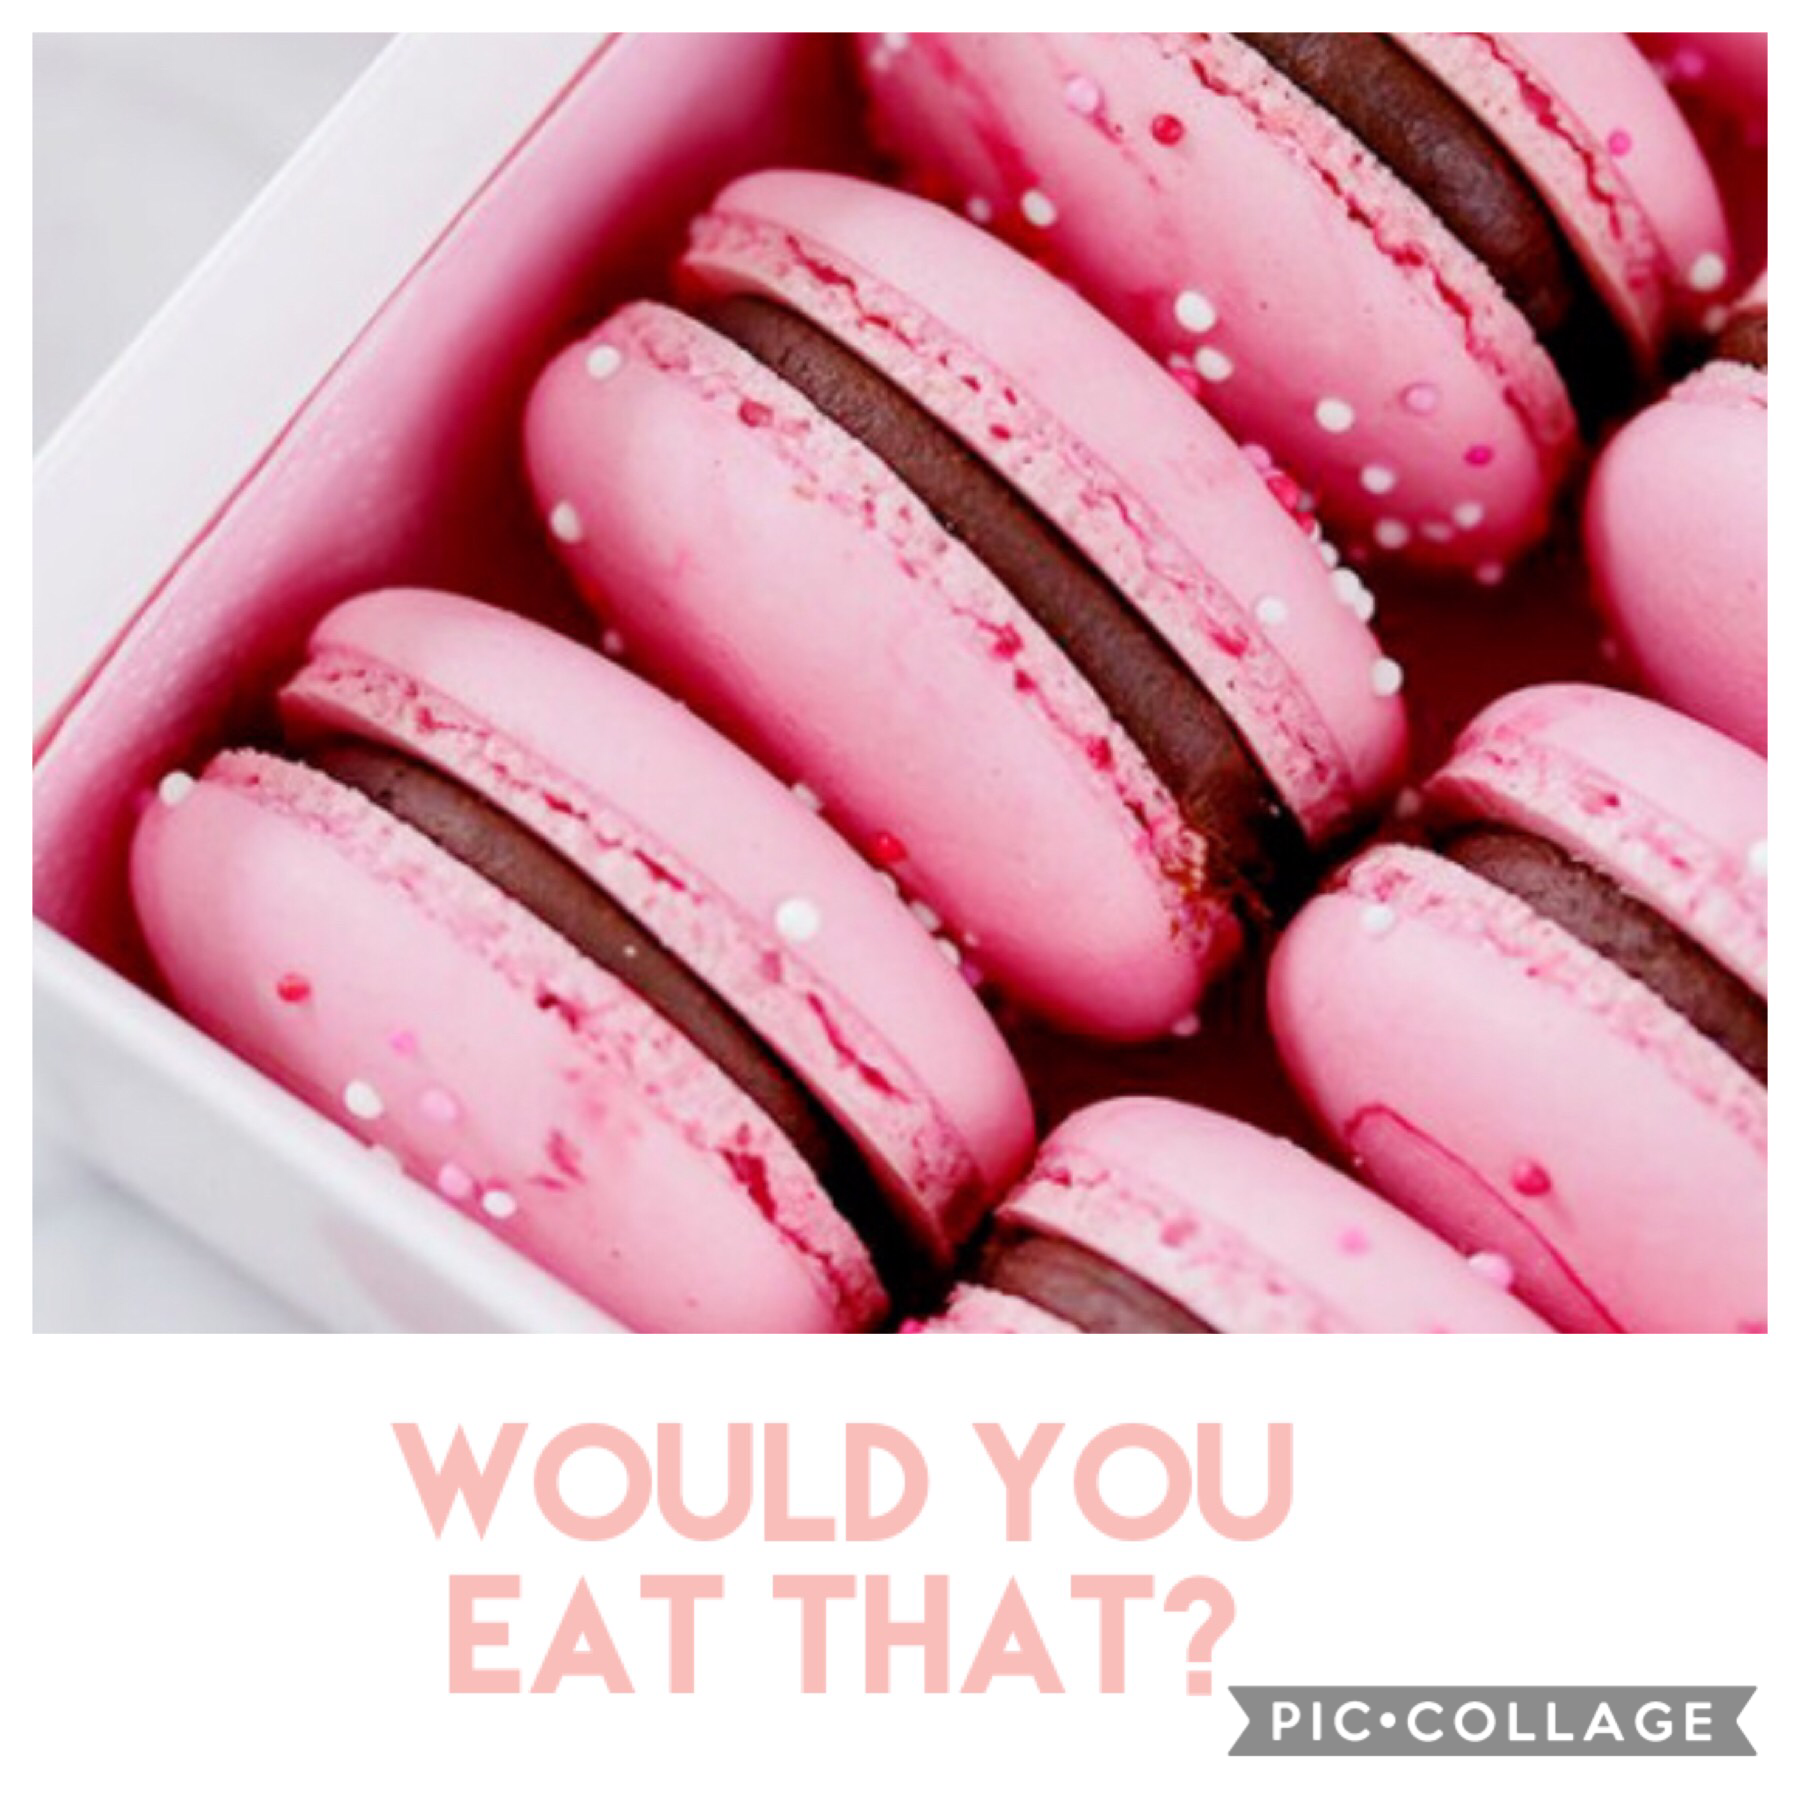 Comment Down “If You Would Eat That?”